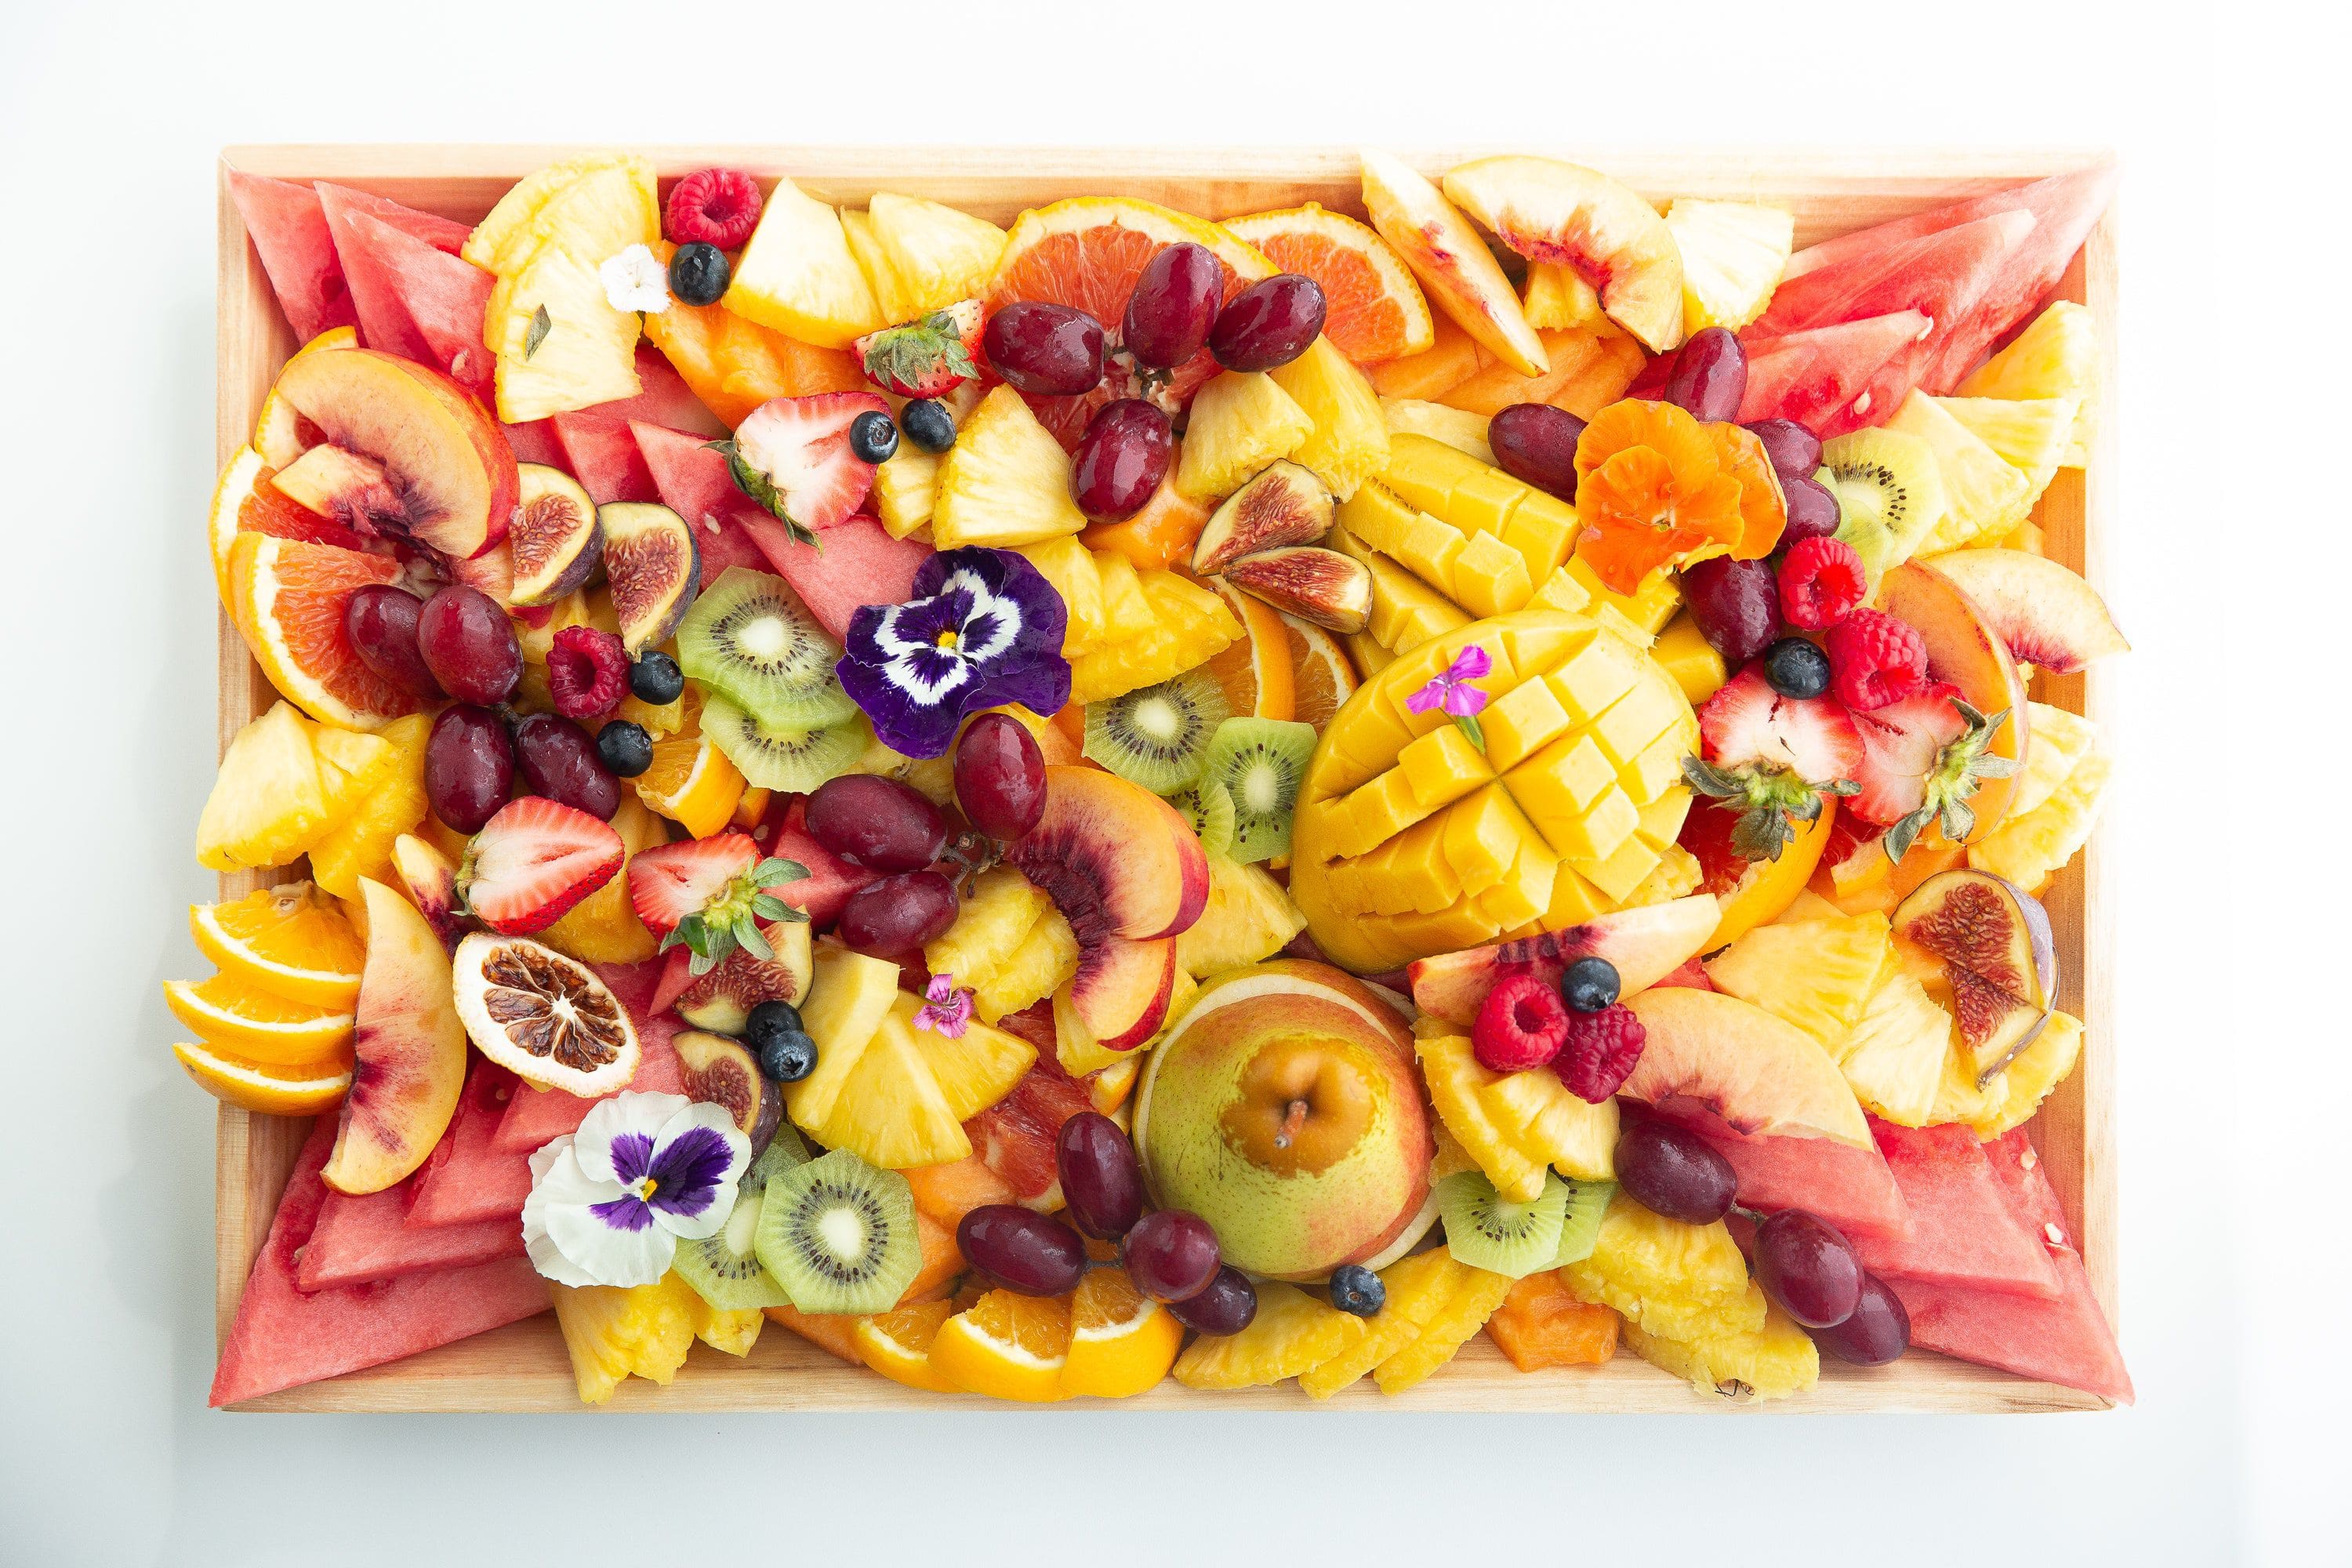 Best fruit platter large for delivery in Toronto Ontario